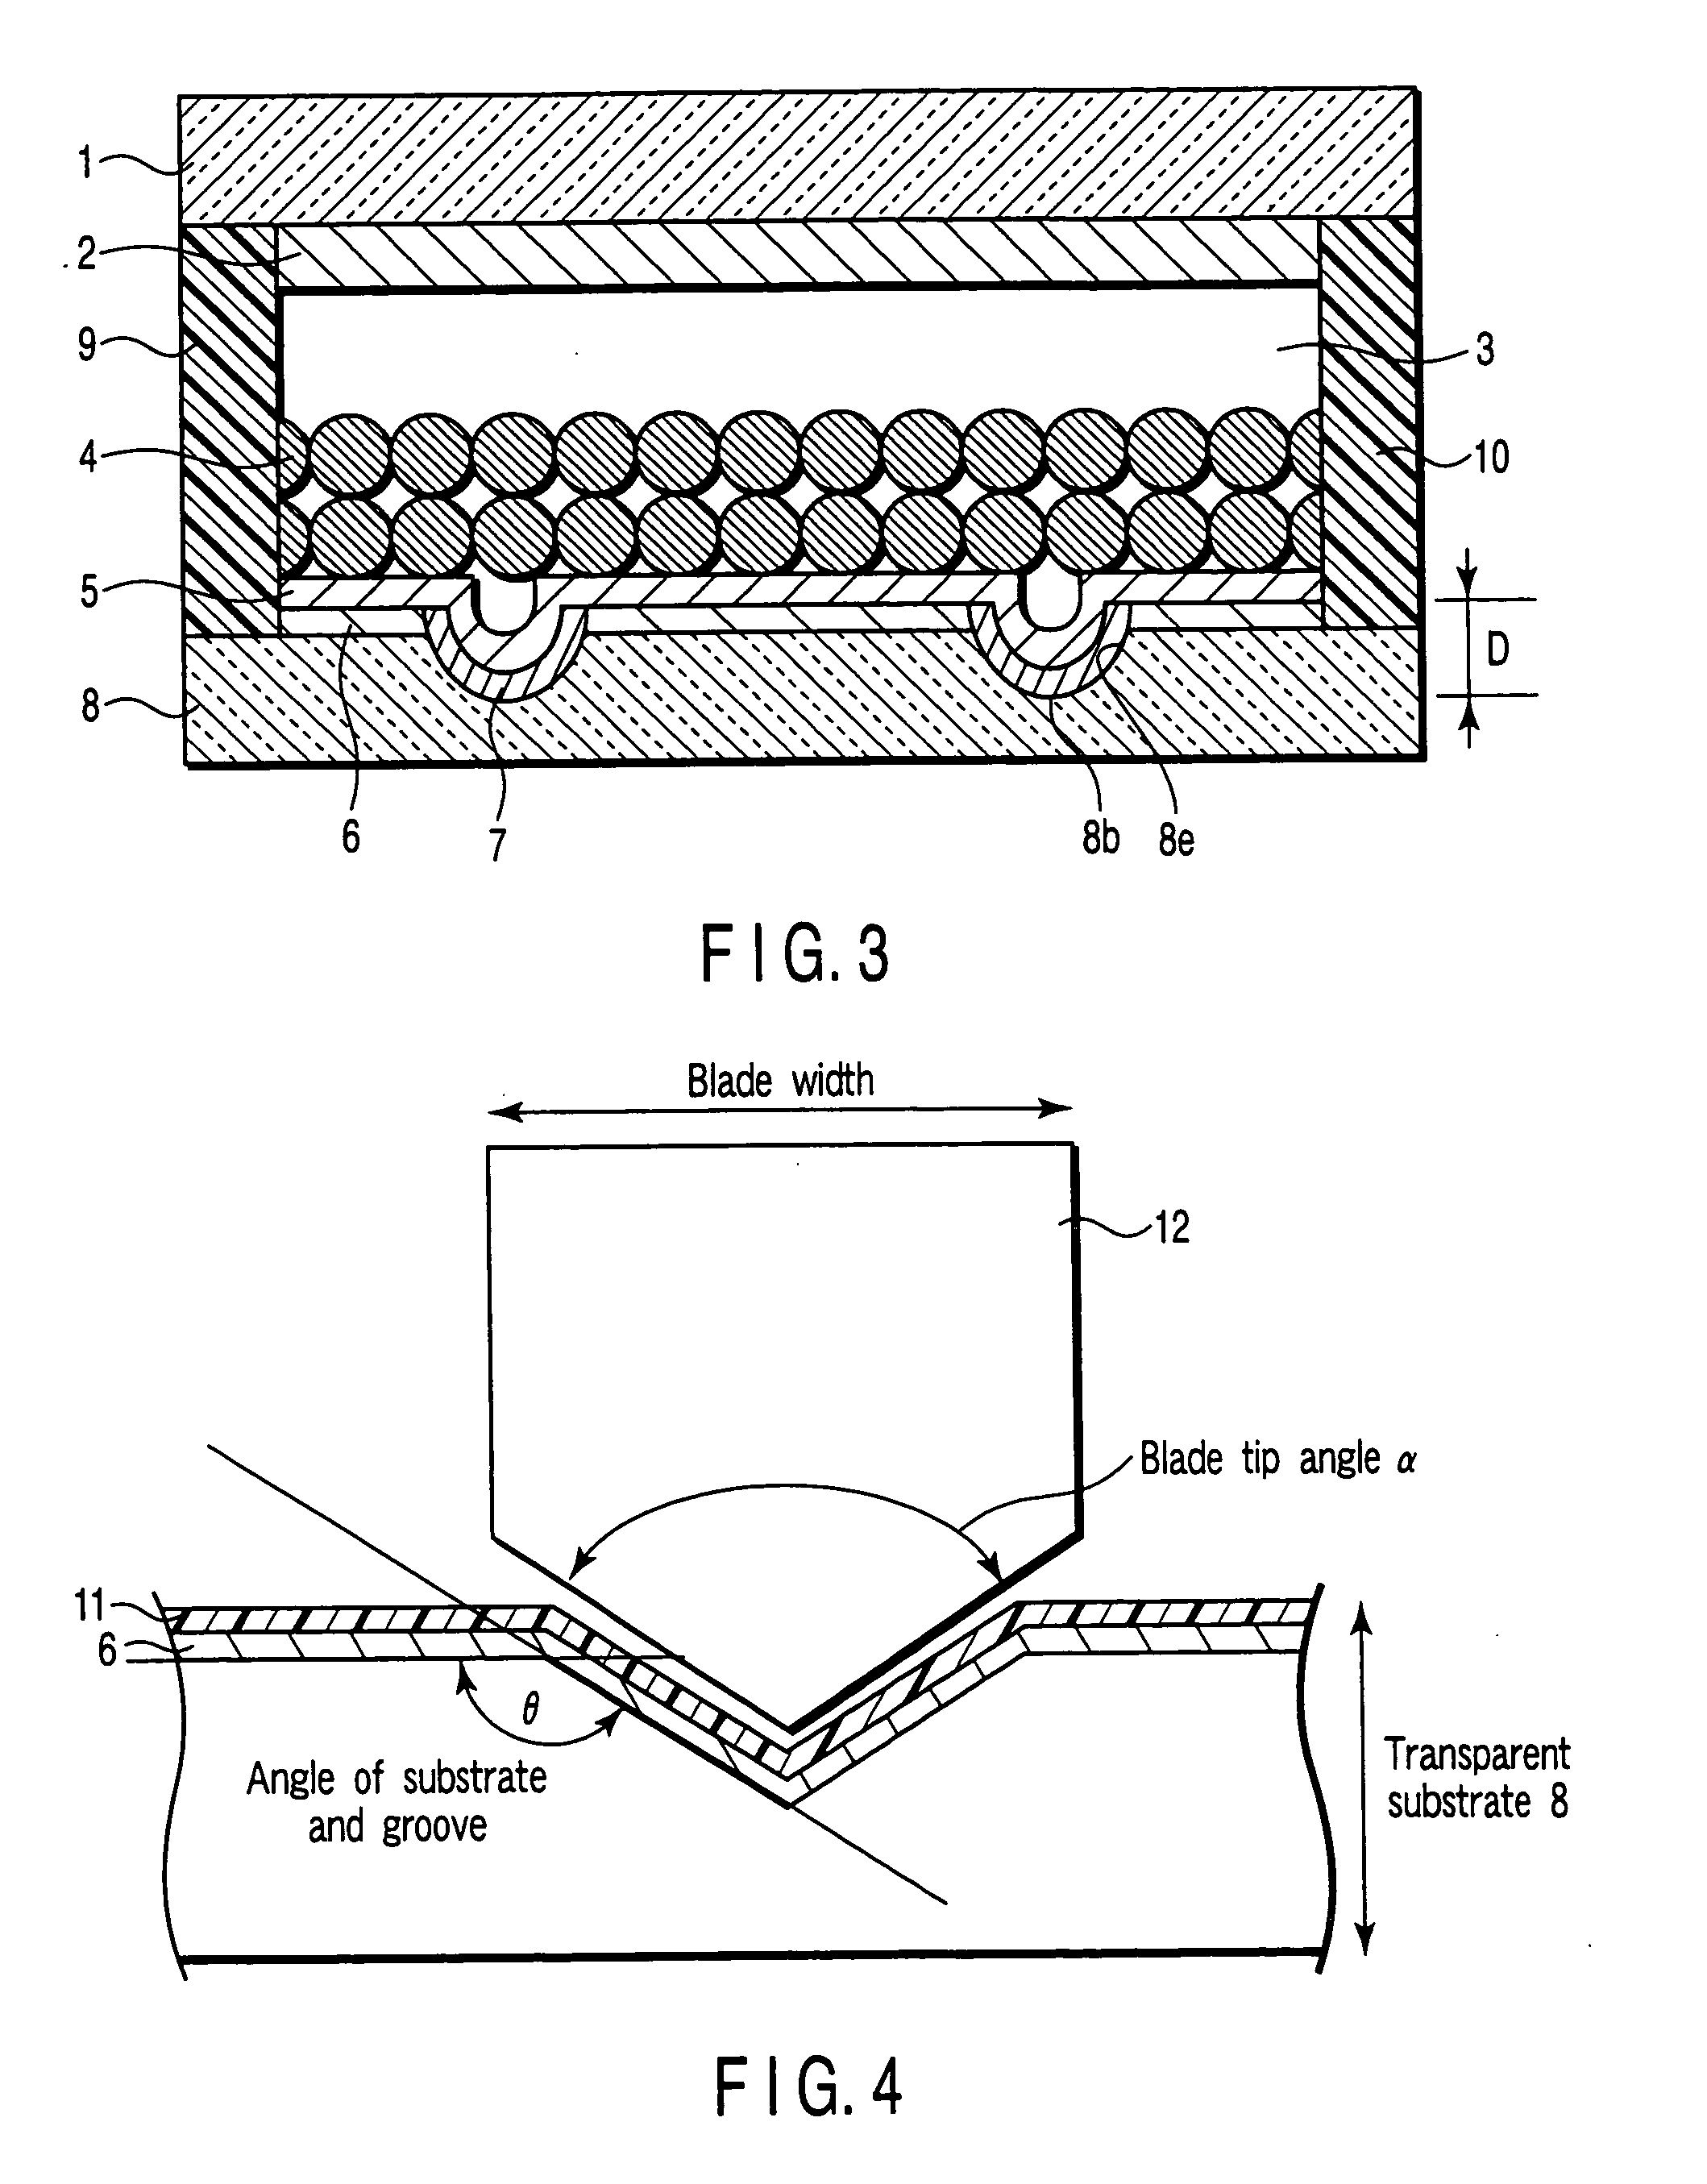 Photosensitized solar cell and method of manufacturing the same